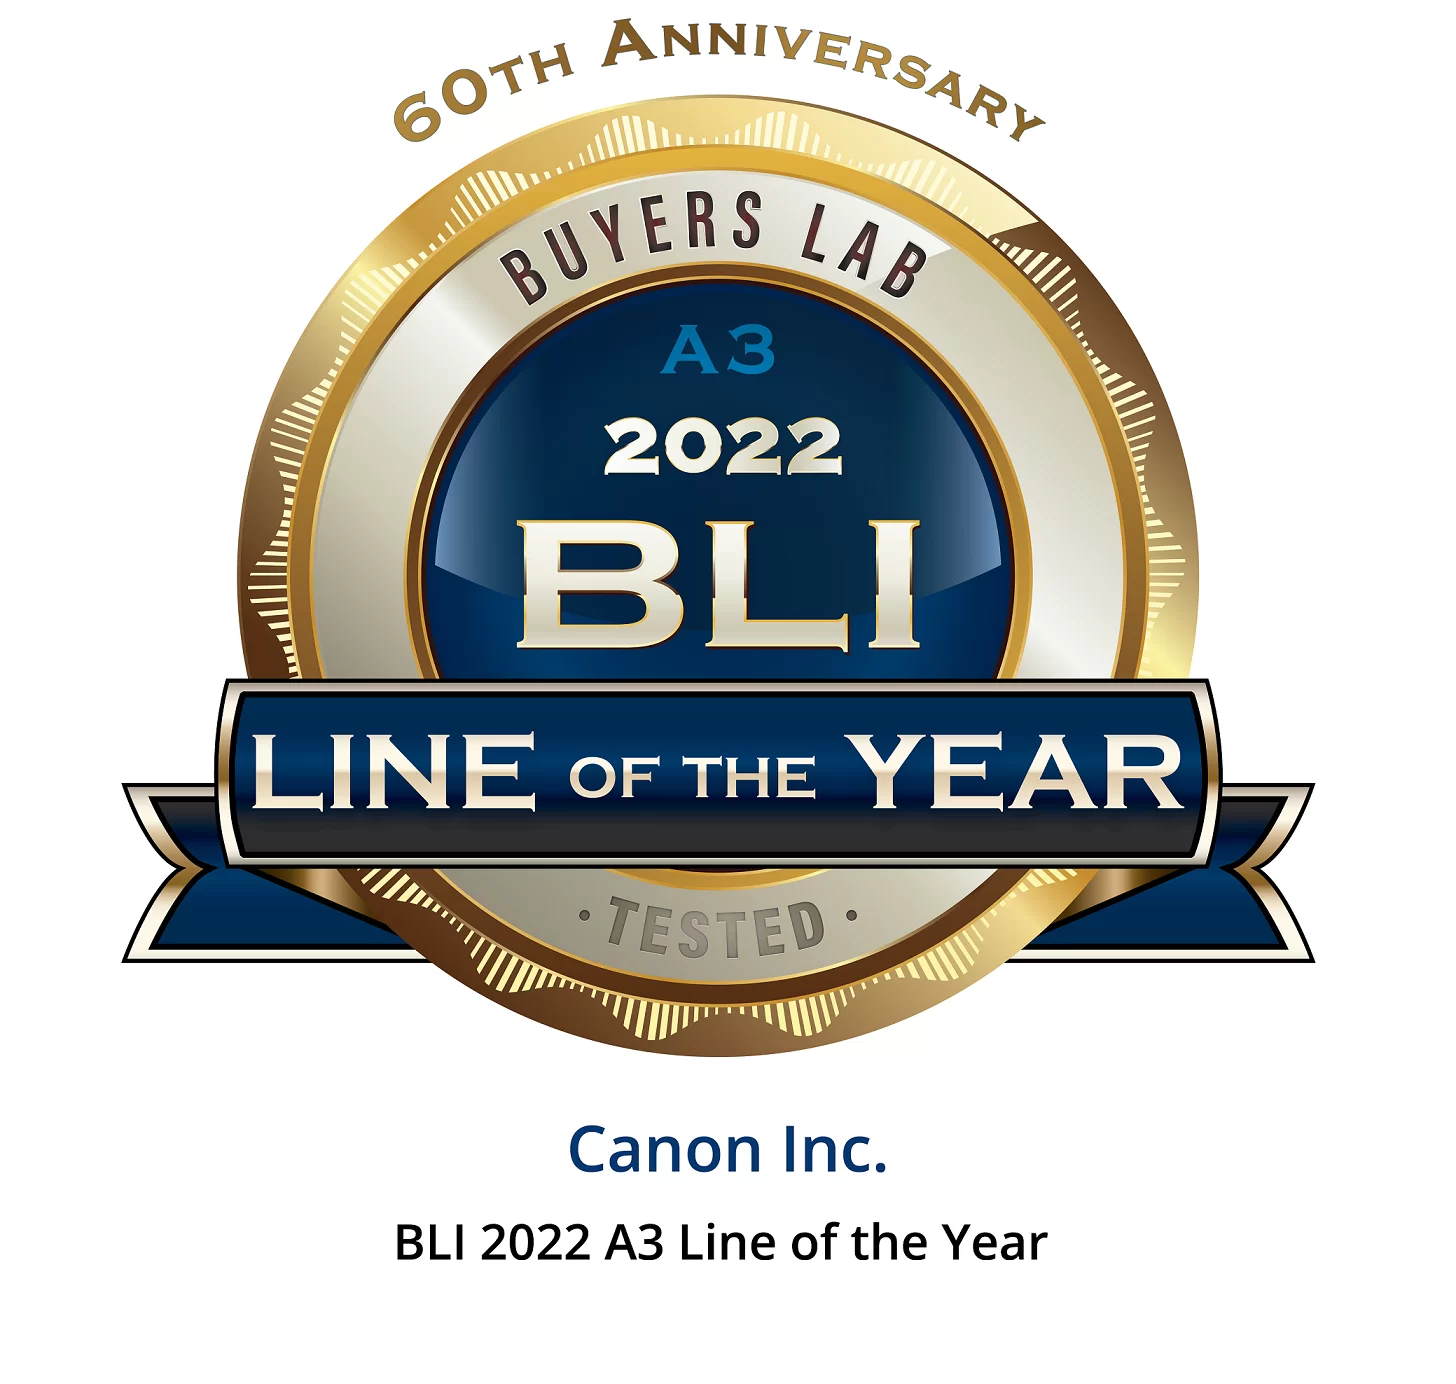 2022-BLI-Line-of-the-Year Canon-A3-1